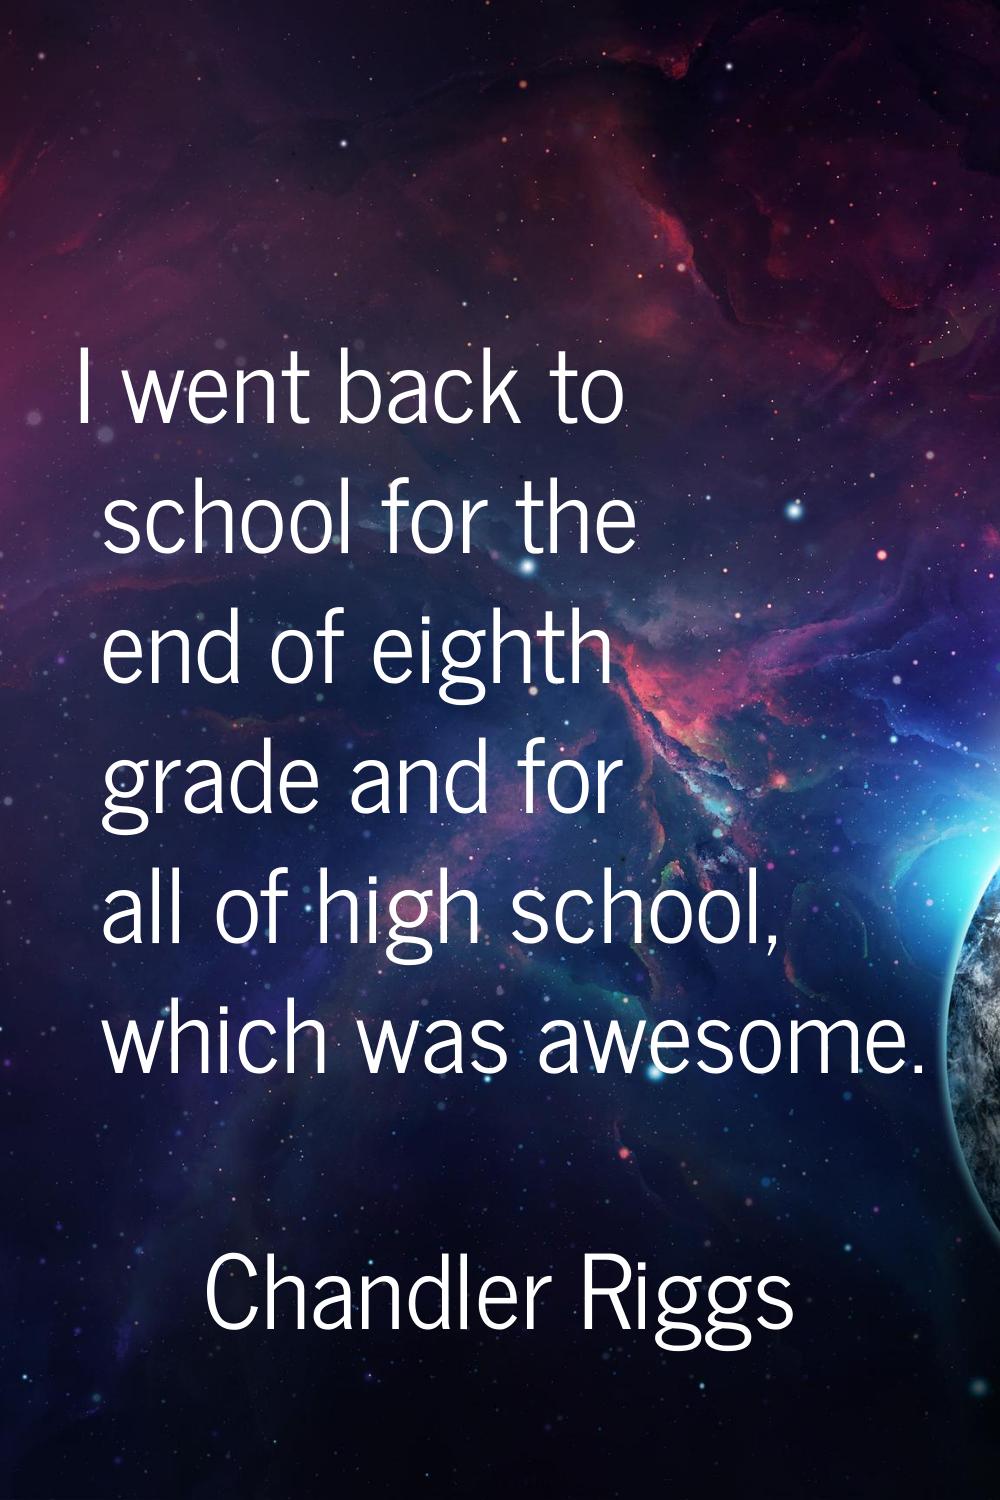 I went back to school for the end of eighth grade and for all of high school, which was awesome.